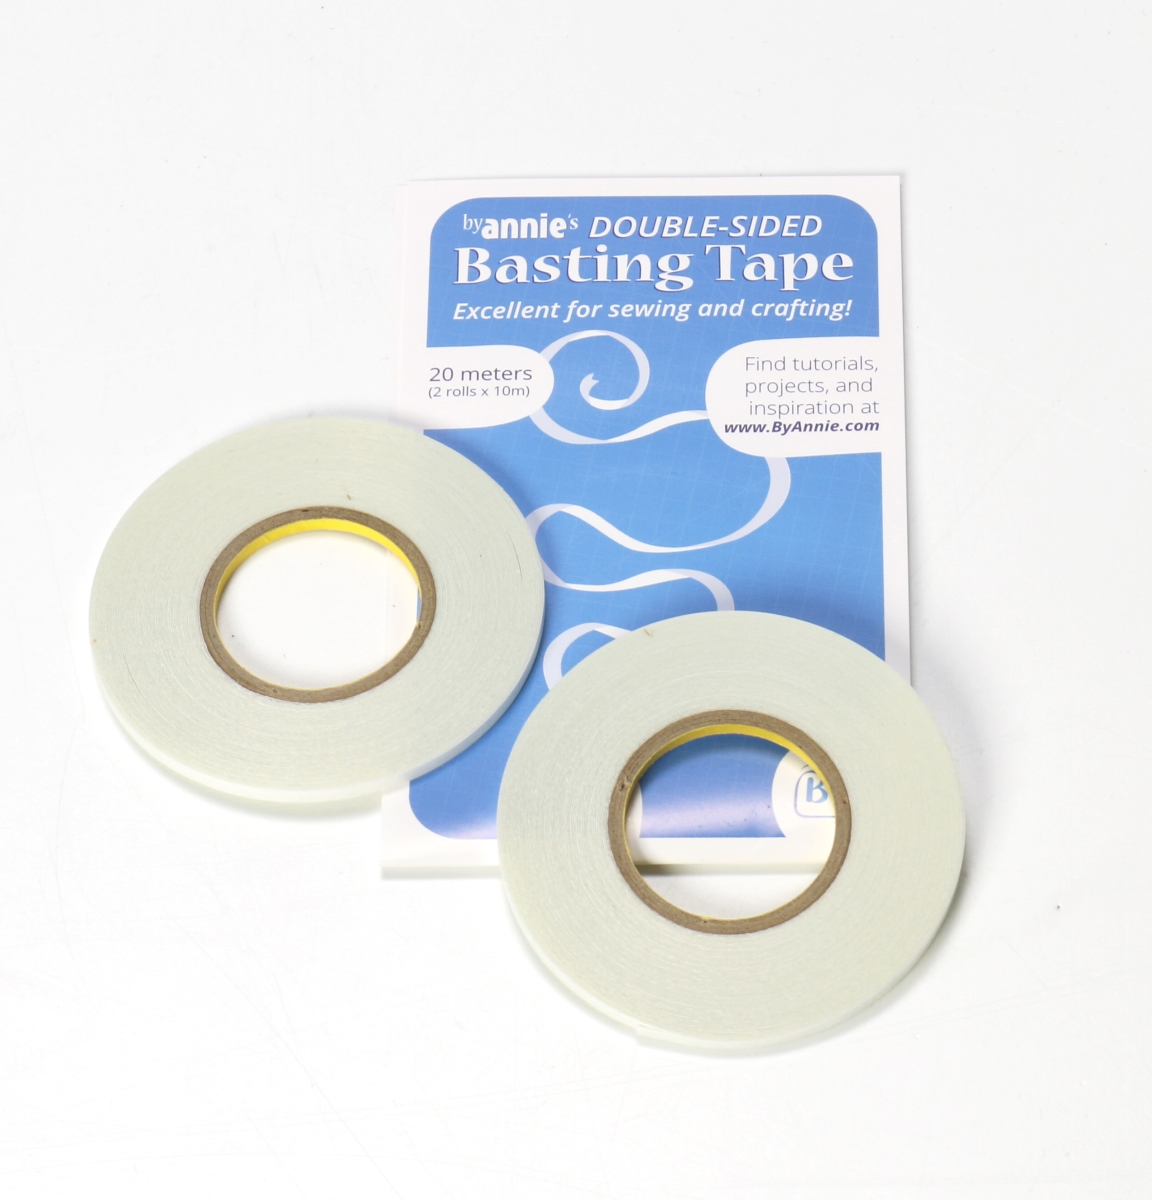 Double-sided Basting Tape byAnnie